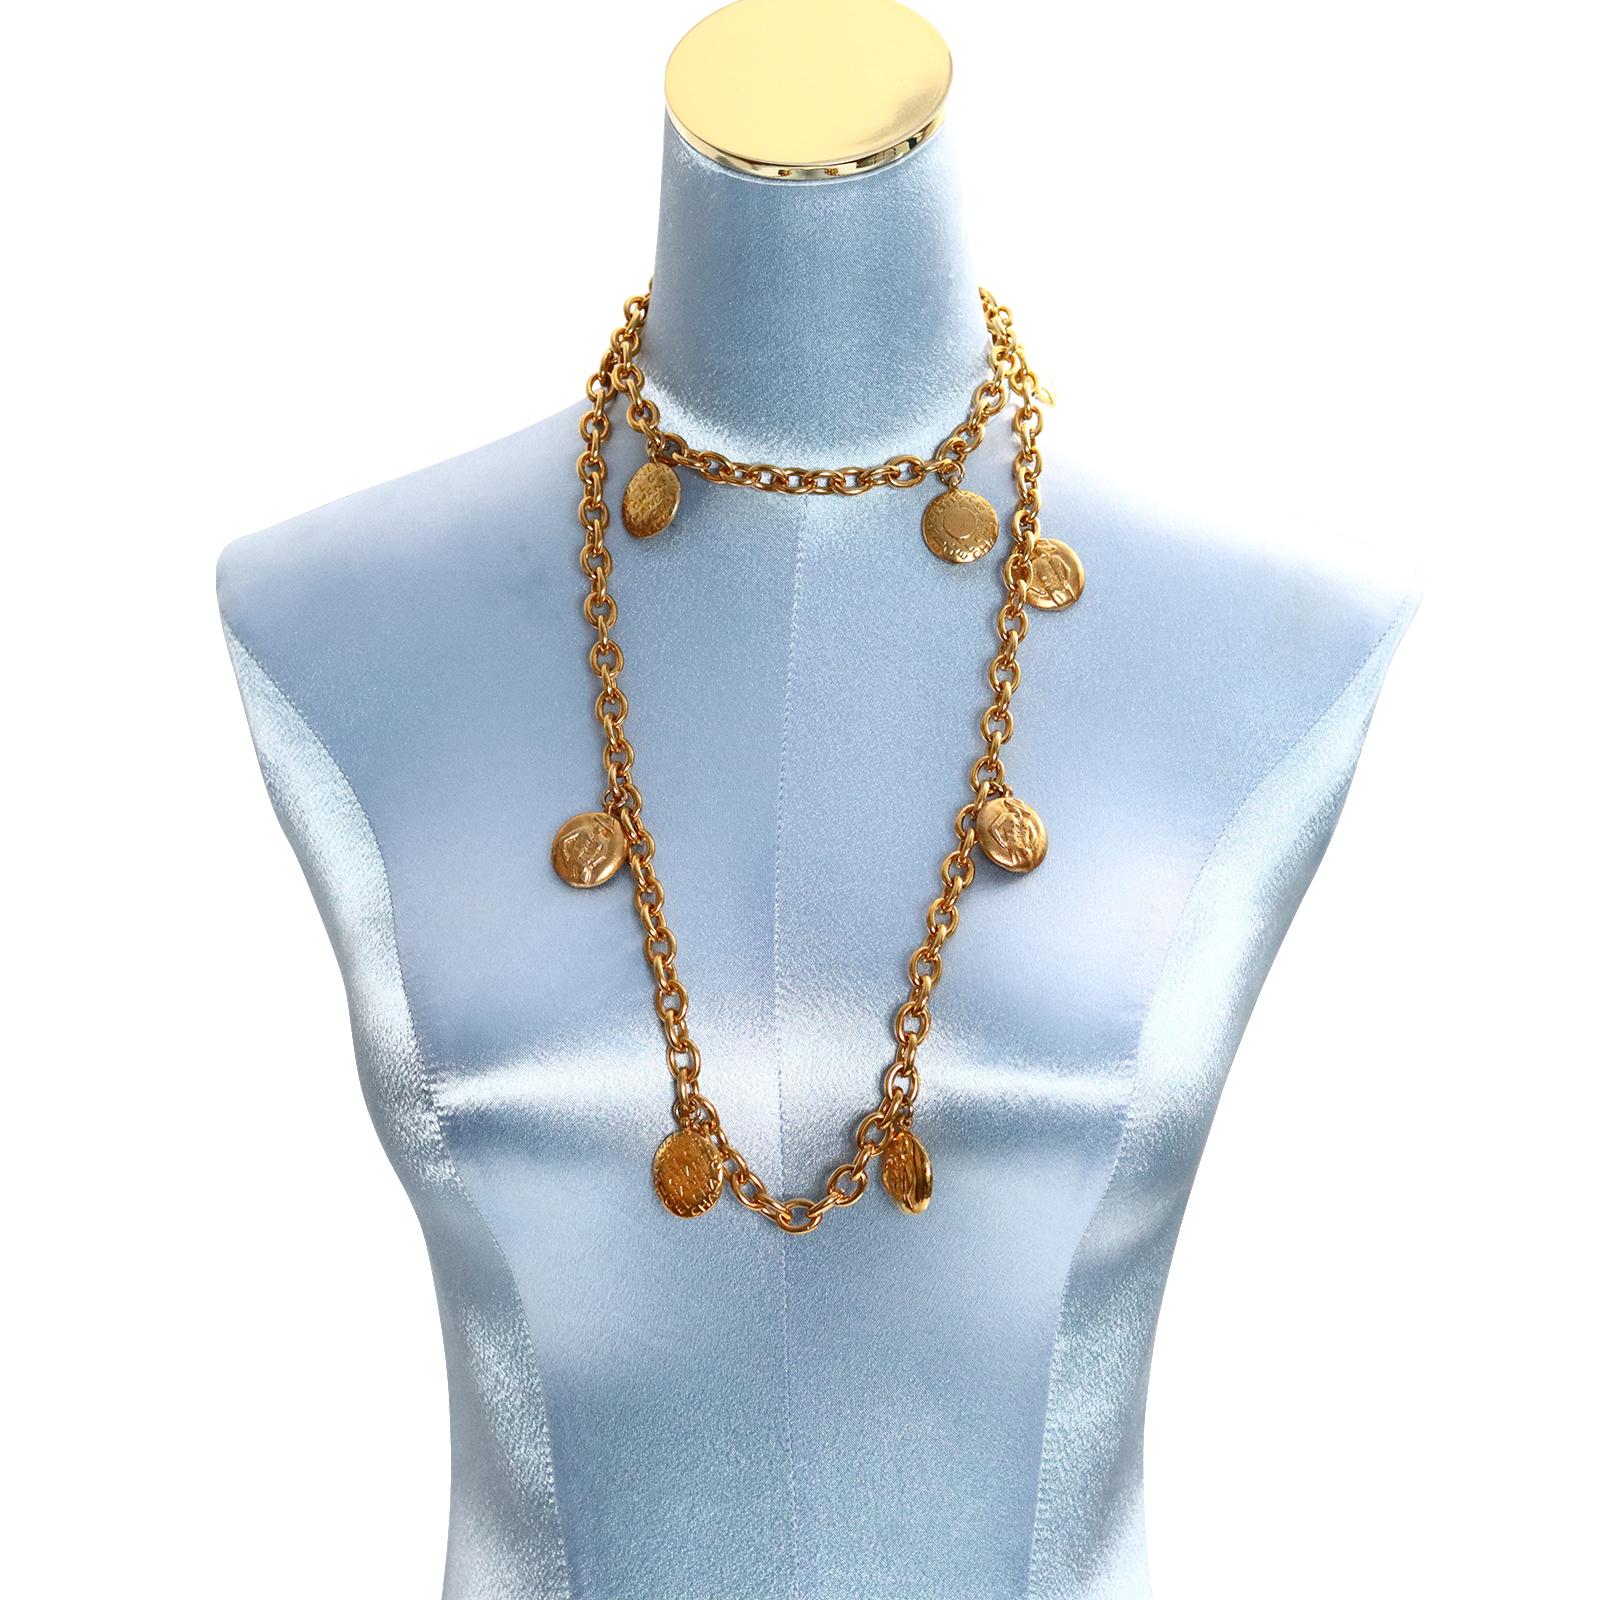 Vintage Chanel Gold Disc Chanel and Coco on Long Necklace. A great necklace from the 1980s with dangling discs that have an imprint of CoCo on one side and Chanel all over the other on a thick and heavy link chain in great shape.  Can be doubled and